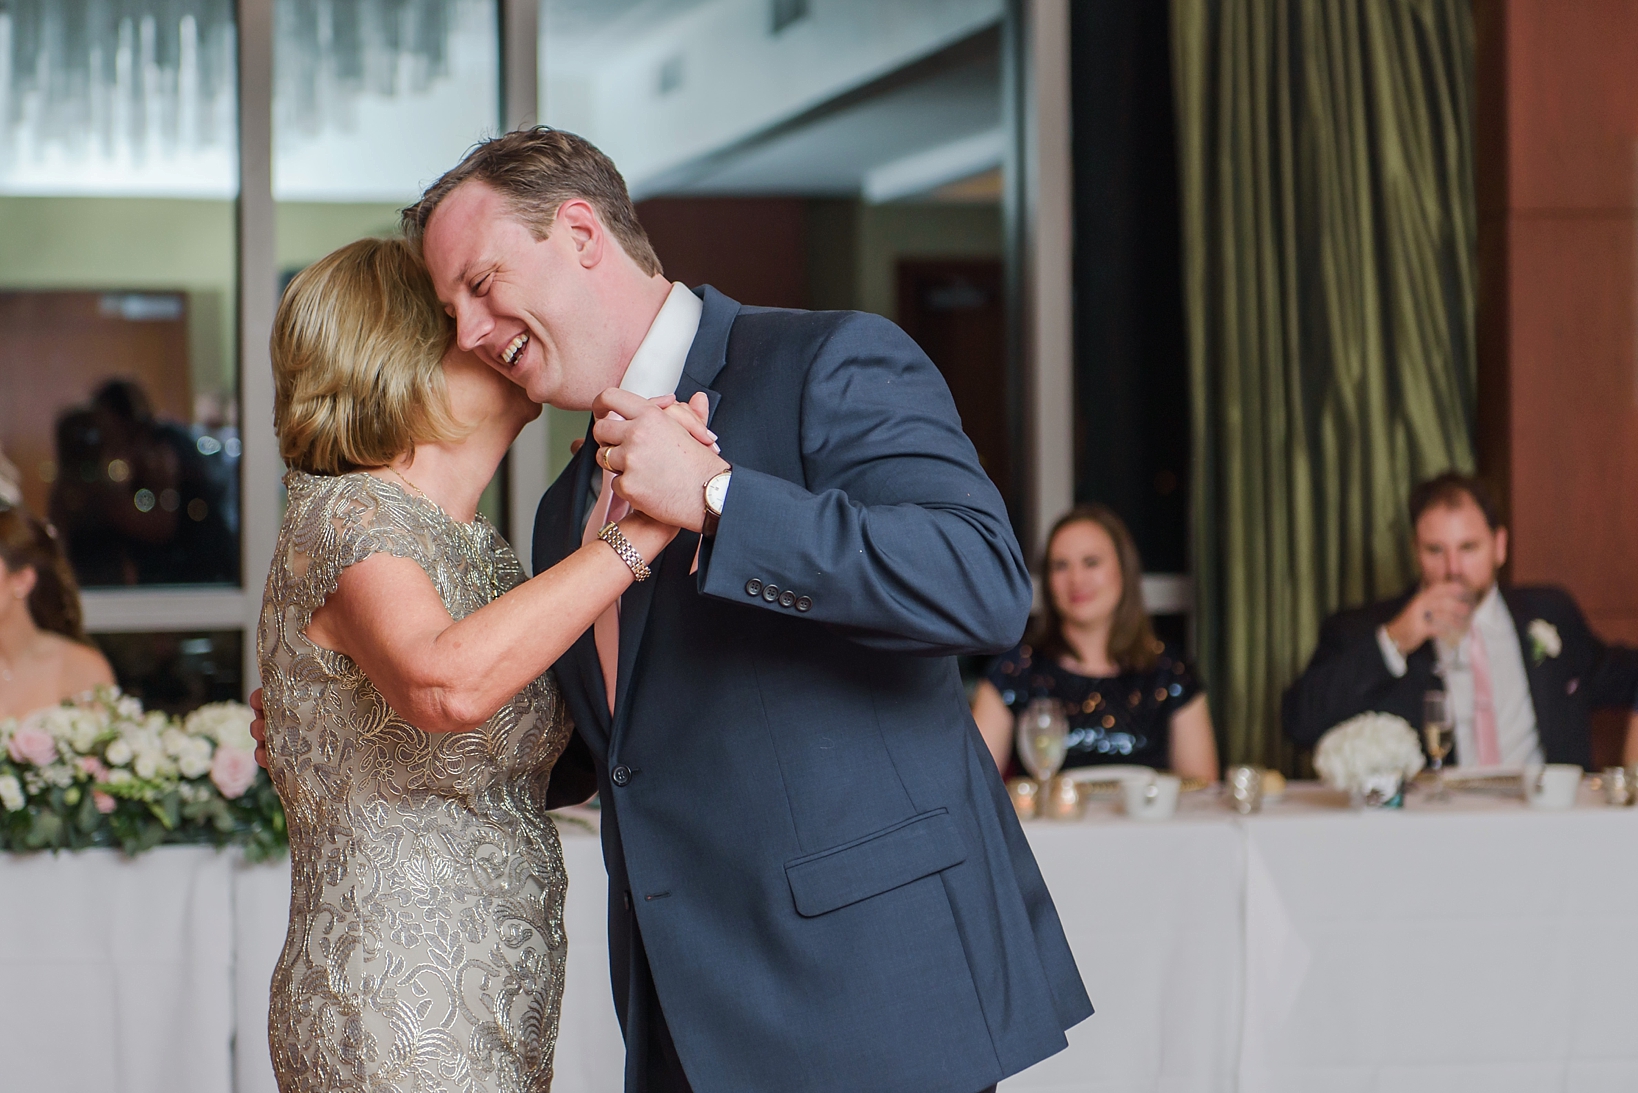 Mother and son dance by Sarah & Ben Photography